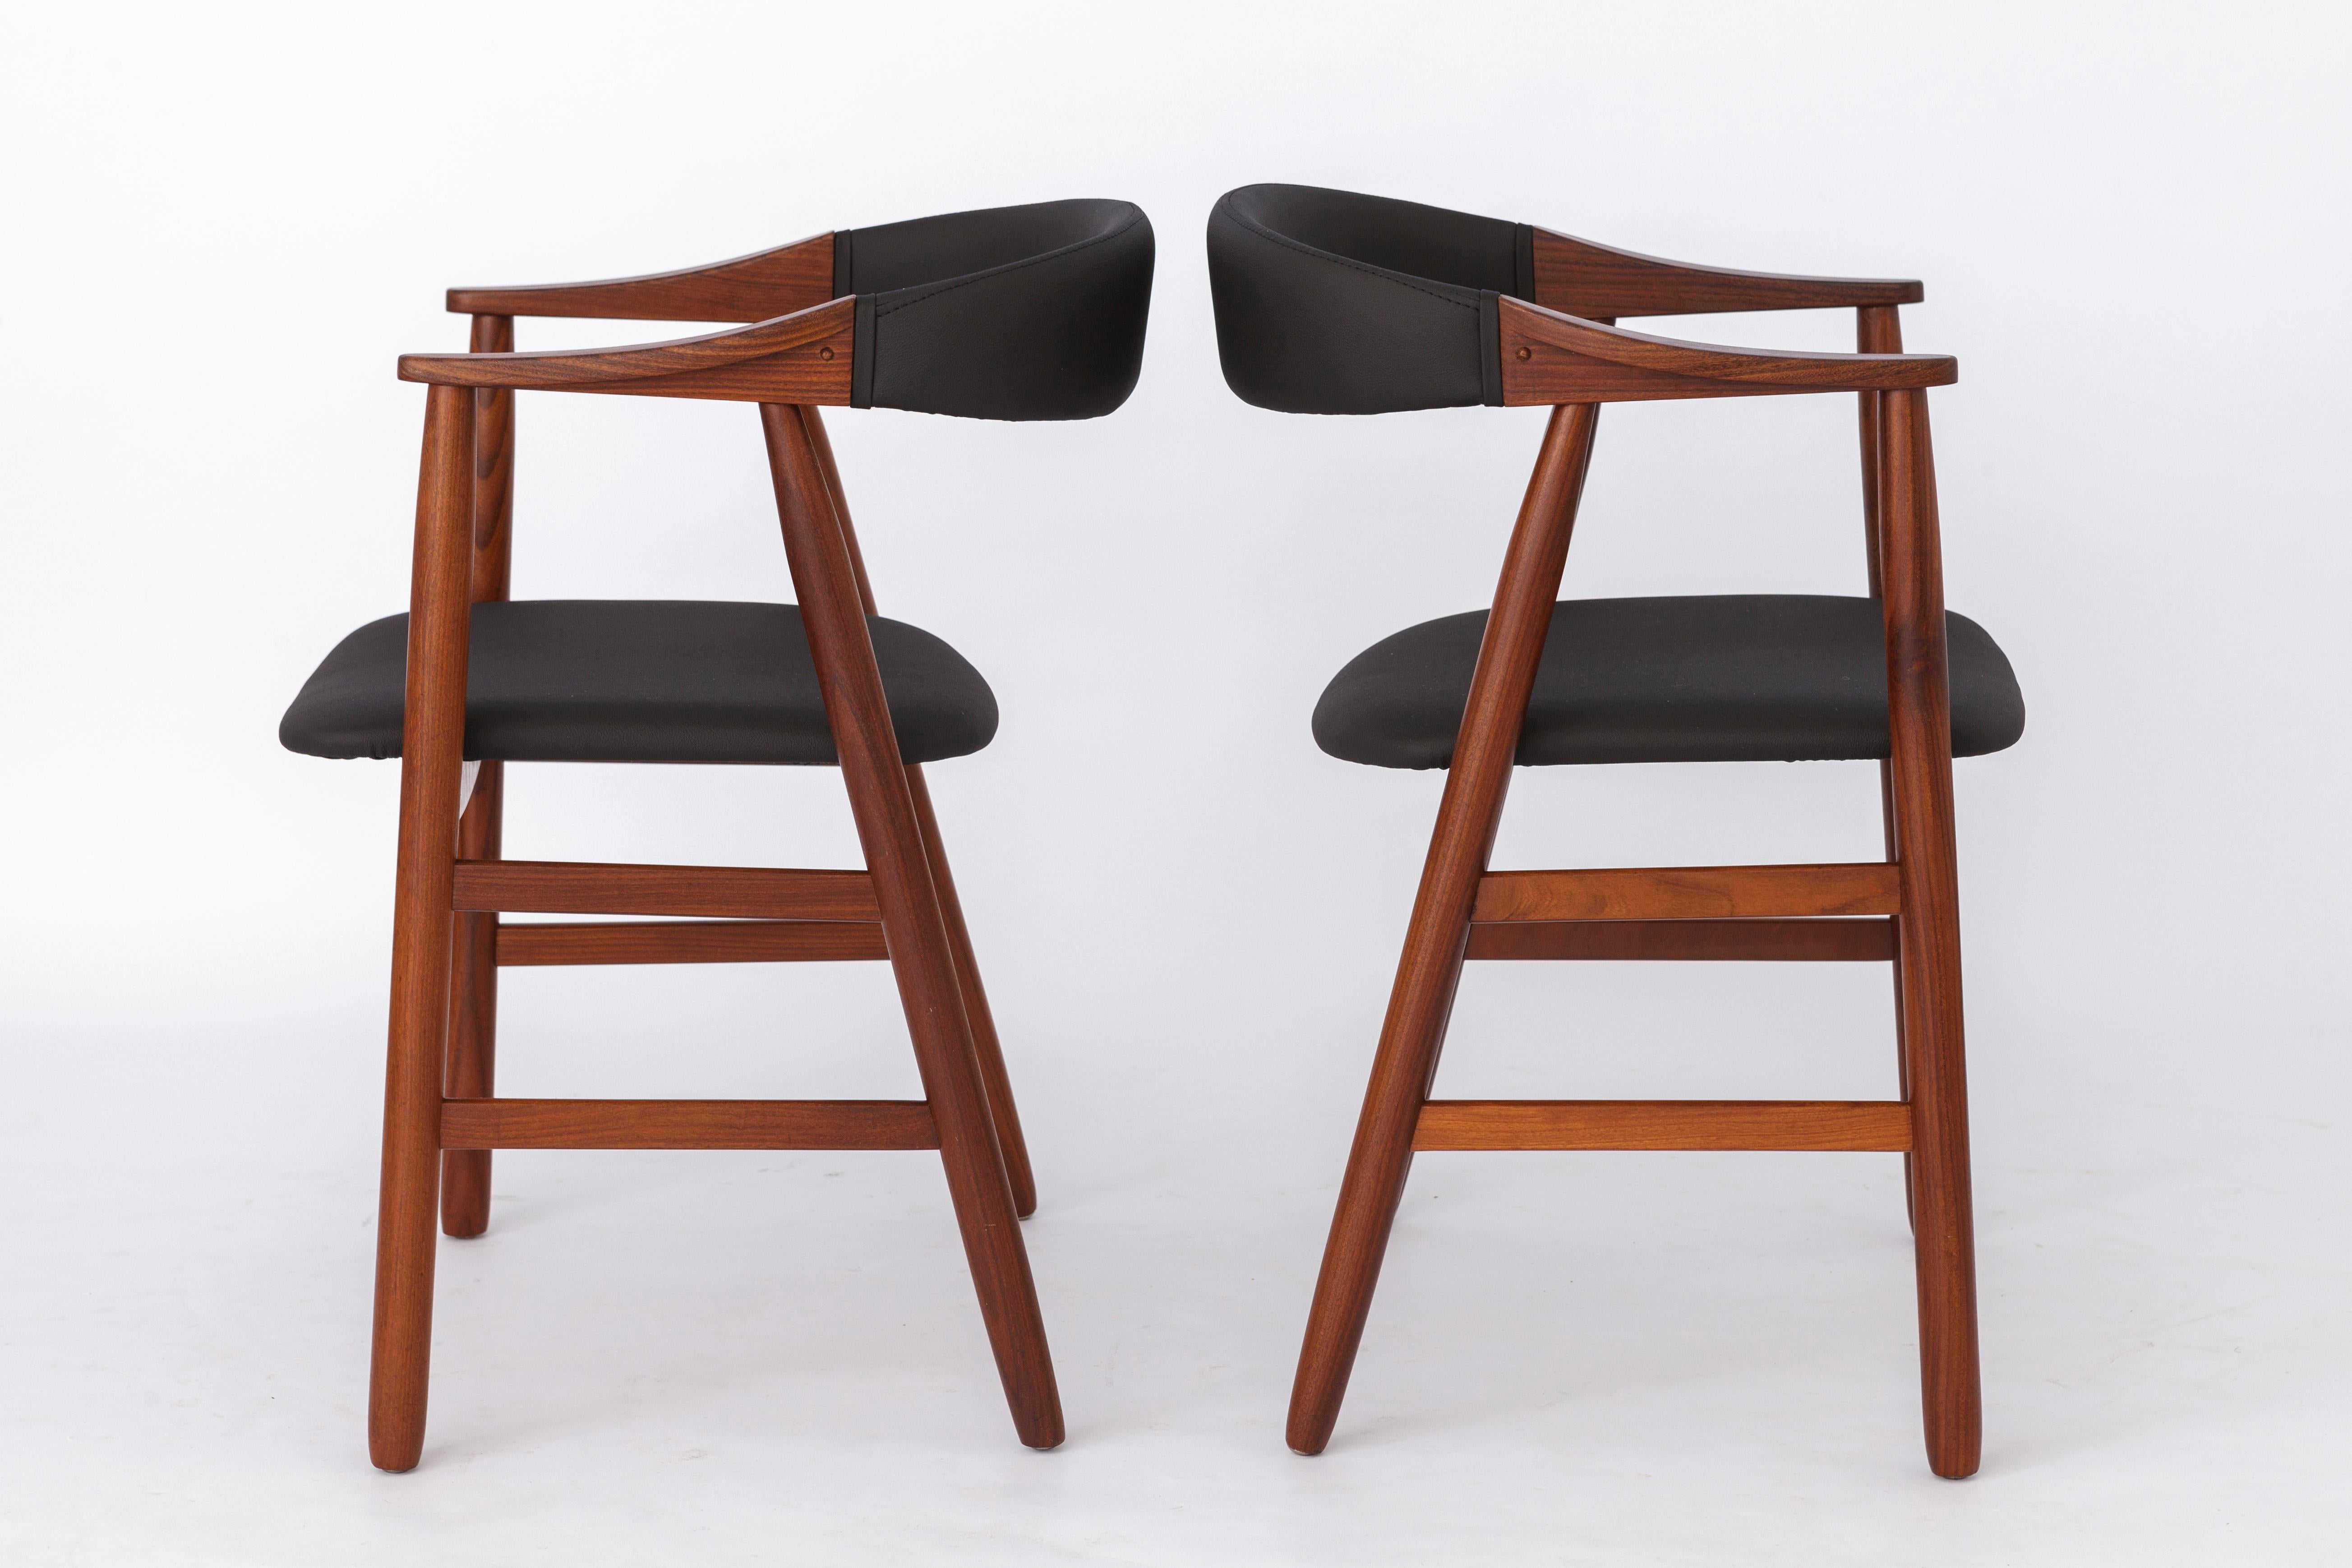 2 Vintage Chairs by Thomas Harlev, Model 213, Danish, for Farstrup, Teak, 1960s. For Sale 2